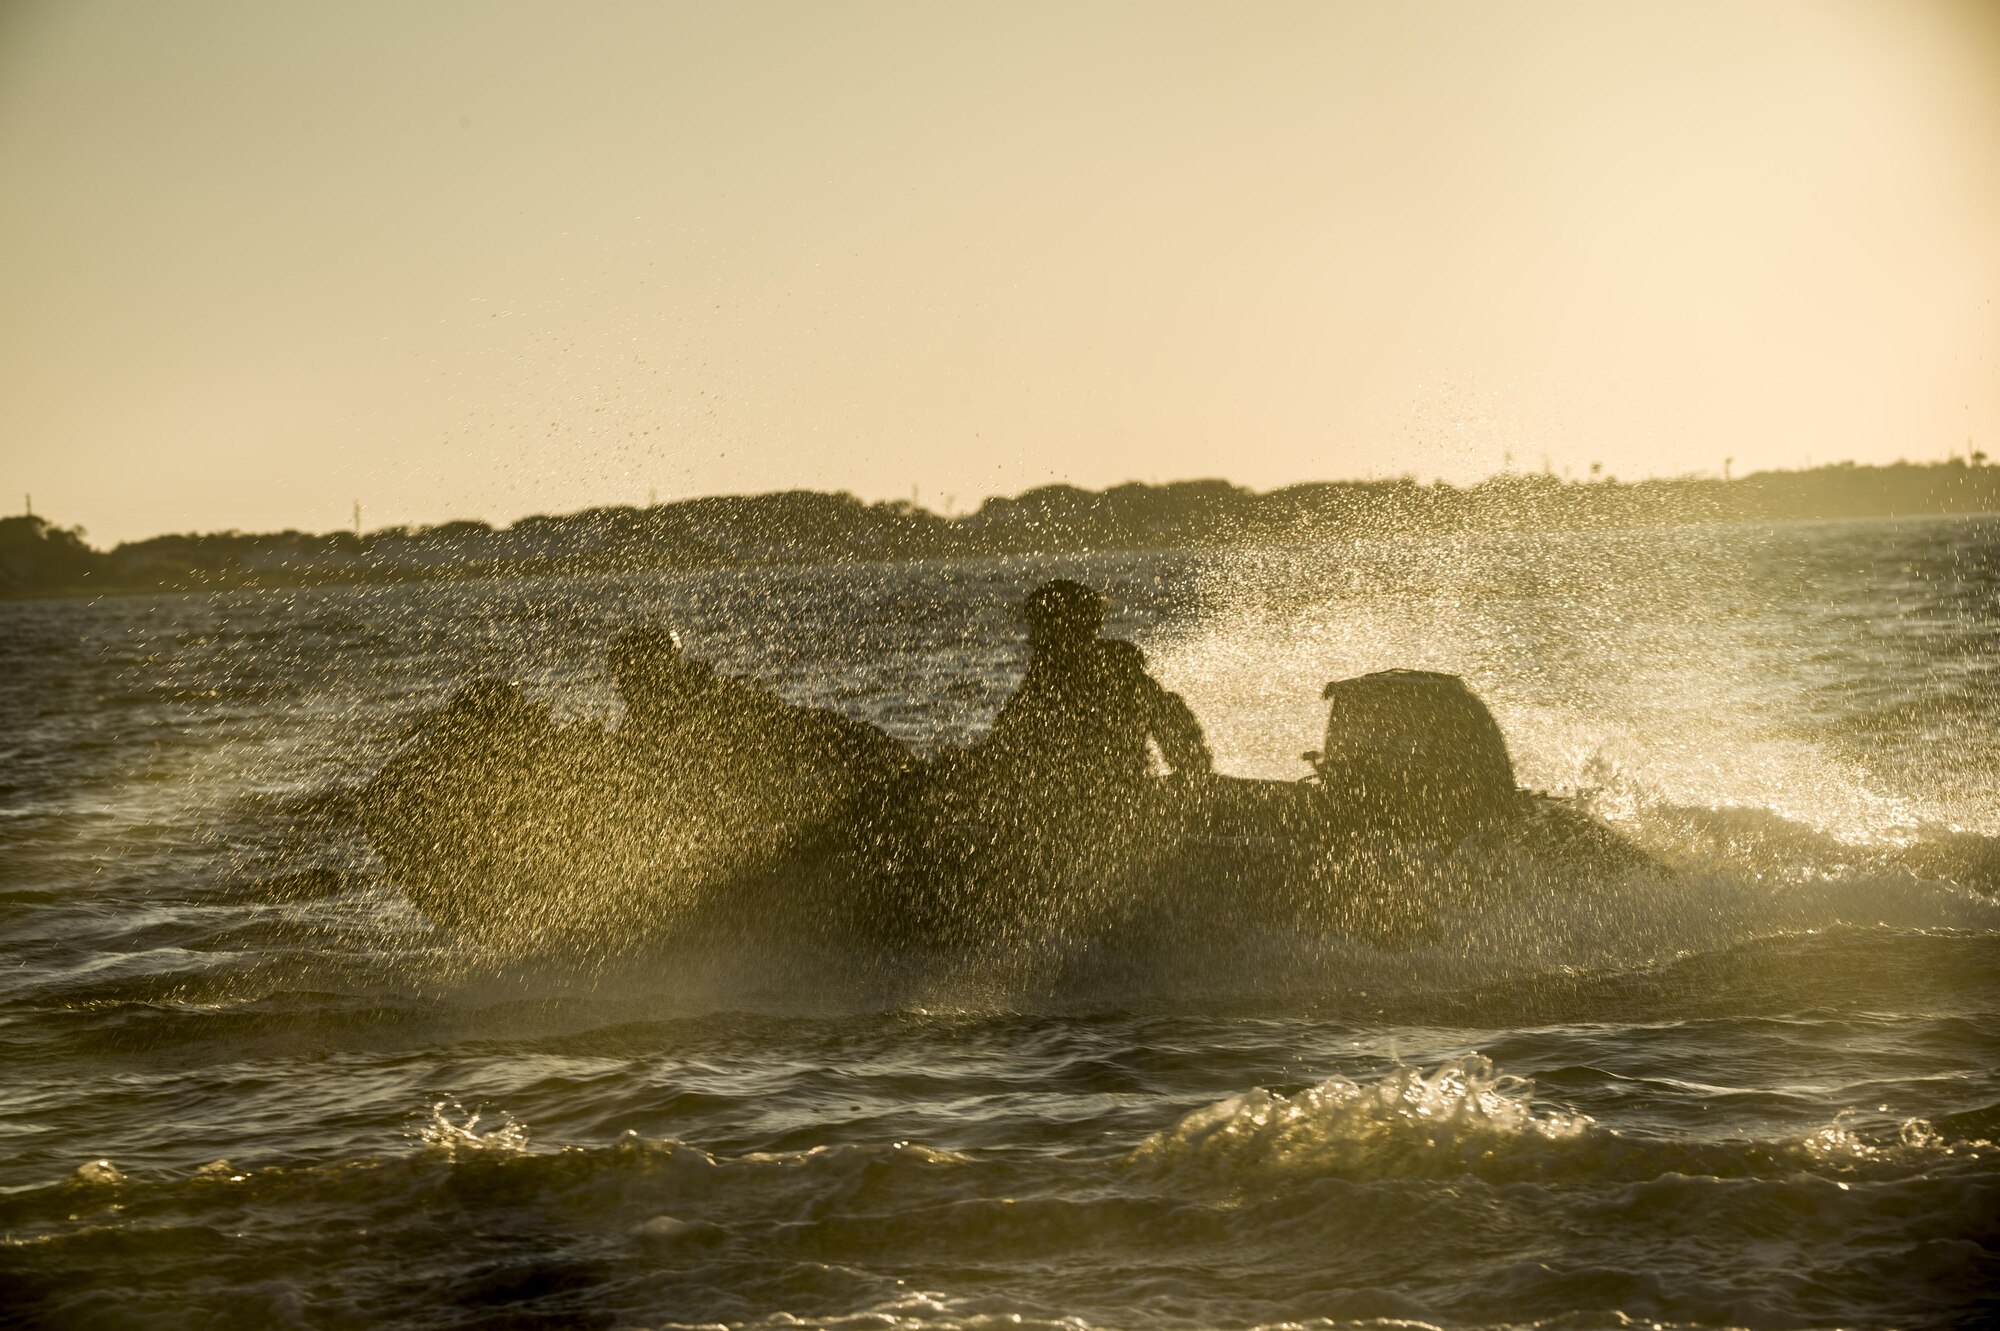 Marine Raiders with the Marine Corp Special Operations Command perform helocast training with the 160th Special Operations Aviation Regiment out of Fort Campbell, Kentucky, at Hurlburt Field, Fla., Oct. 29, 2015. The Raiders spent a week at Hurlburt Field to perform specialized training. (U.S. Air Force photo by Senior Airman Christopher Callaway) 